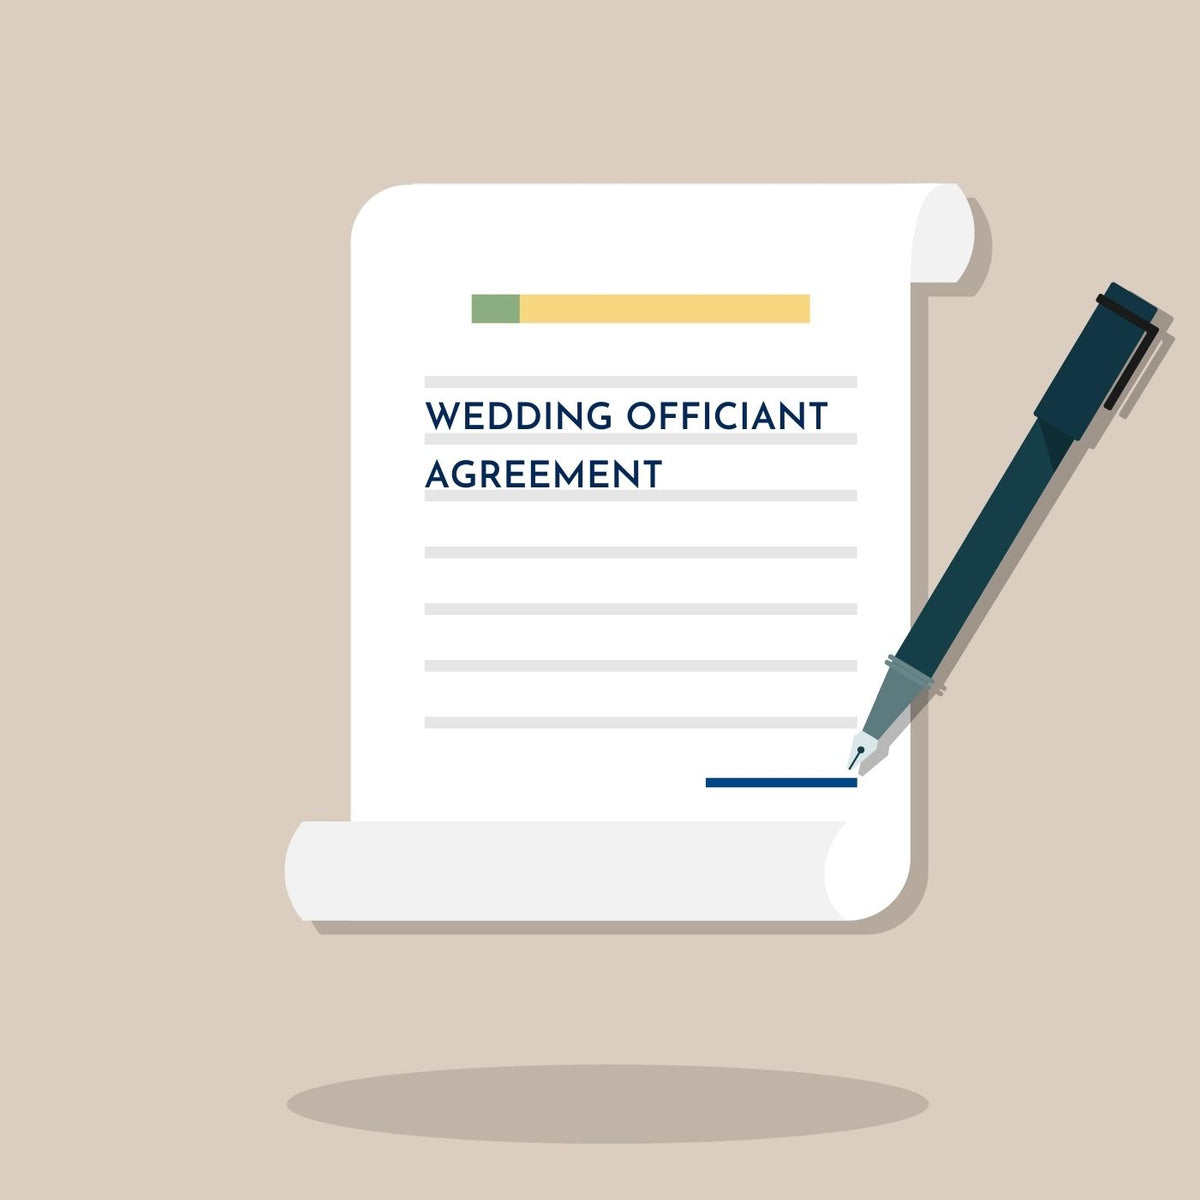 Wedding Officiant Agreement